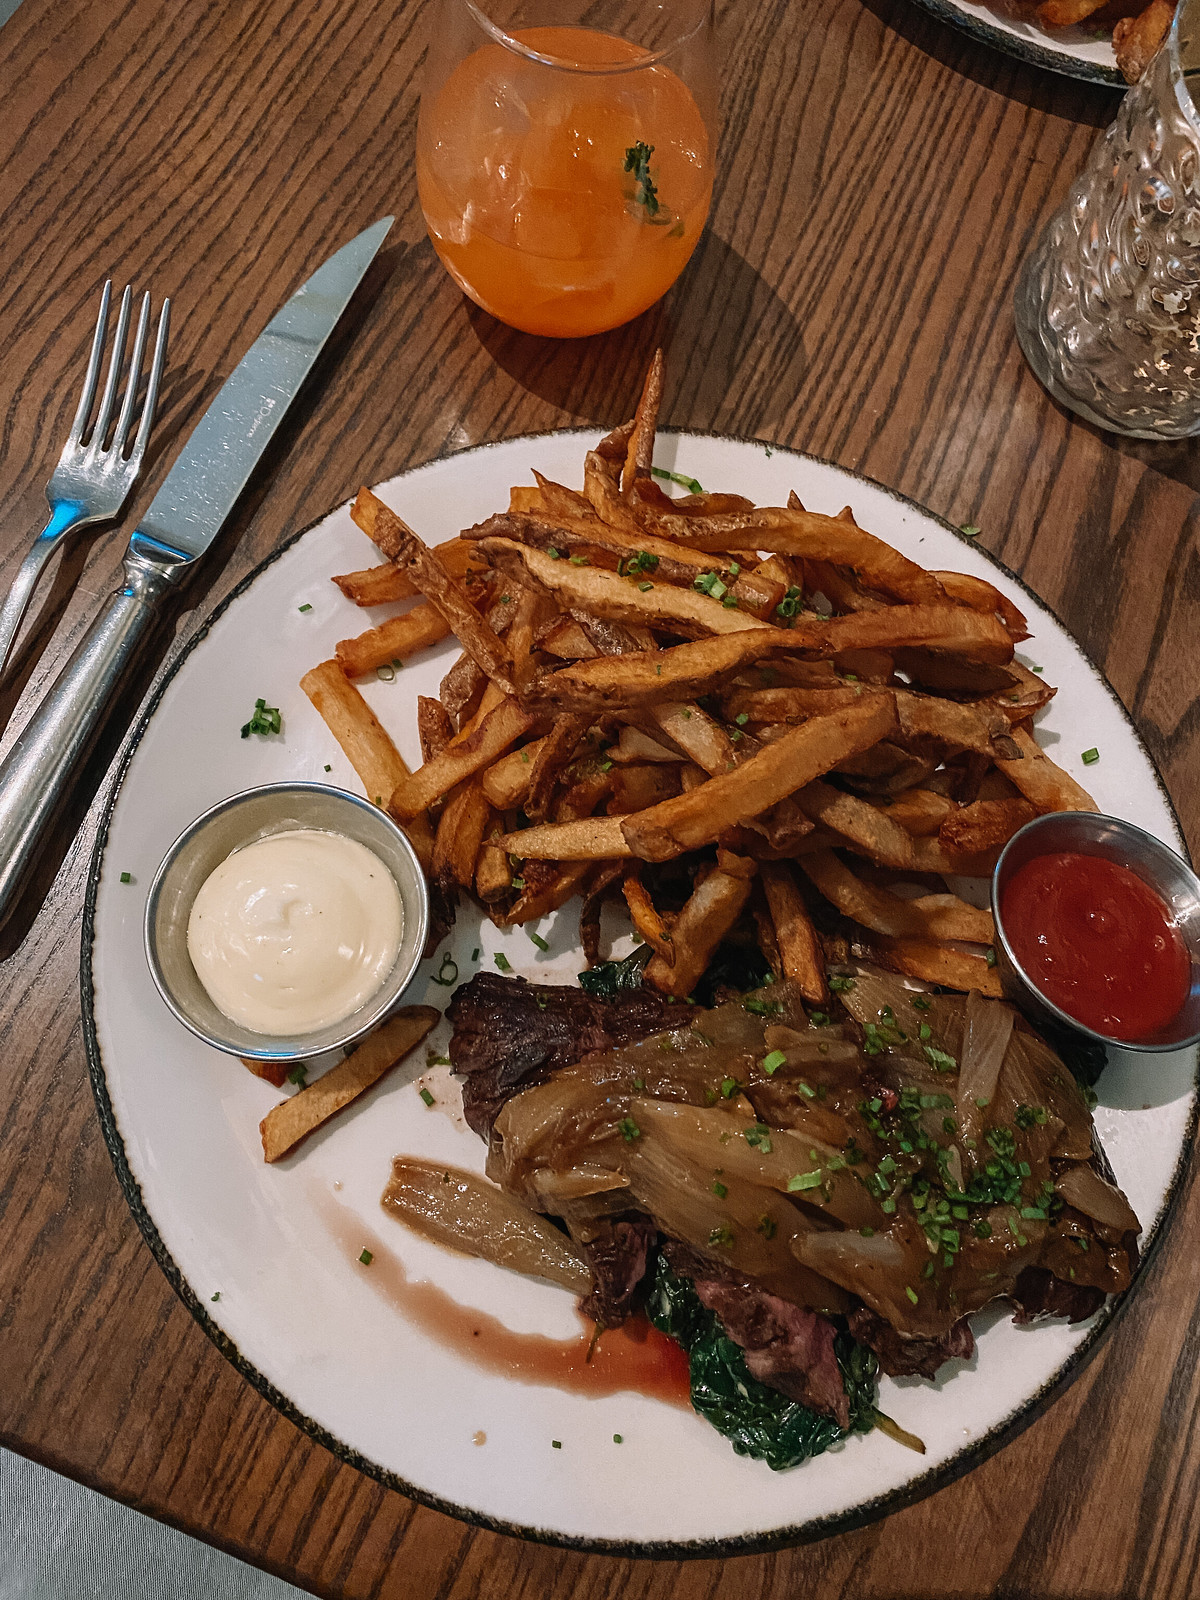 Stoneacre Brasserie Steak Frites | Where to Eat in Newport | 48 Hours in Newport Itinerary | A First Timer's Guide to 2 Days in Newport Rhode Island | What to do in Newport | Newport Travel Guide | Best Things to do in Newport | Best Places to Visit in Newport